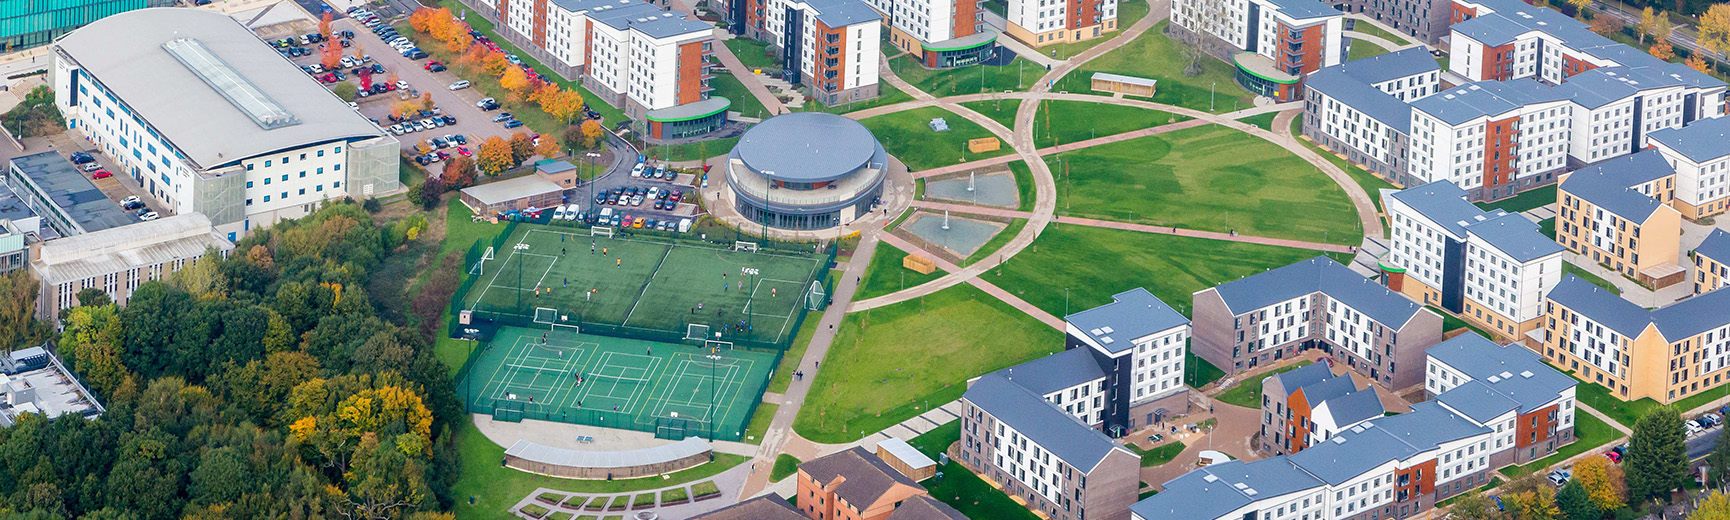 aerial view of College Lane Campus at The University of Hertfordshire mobile